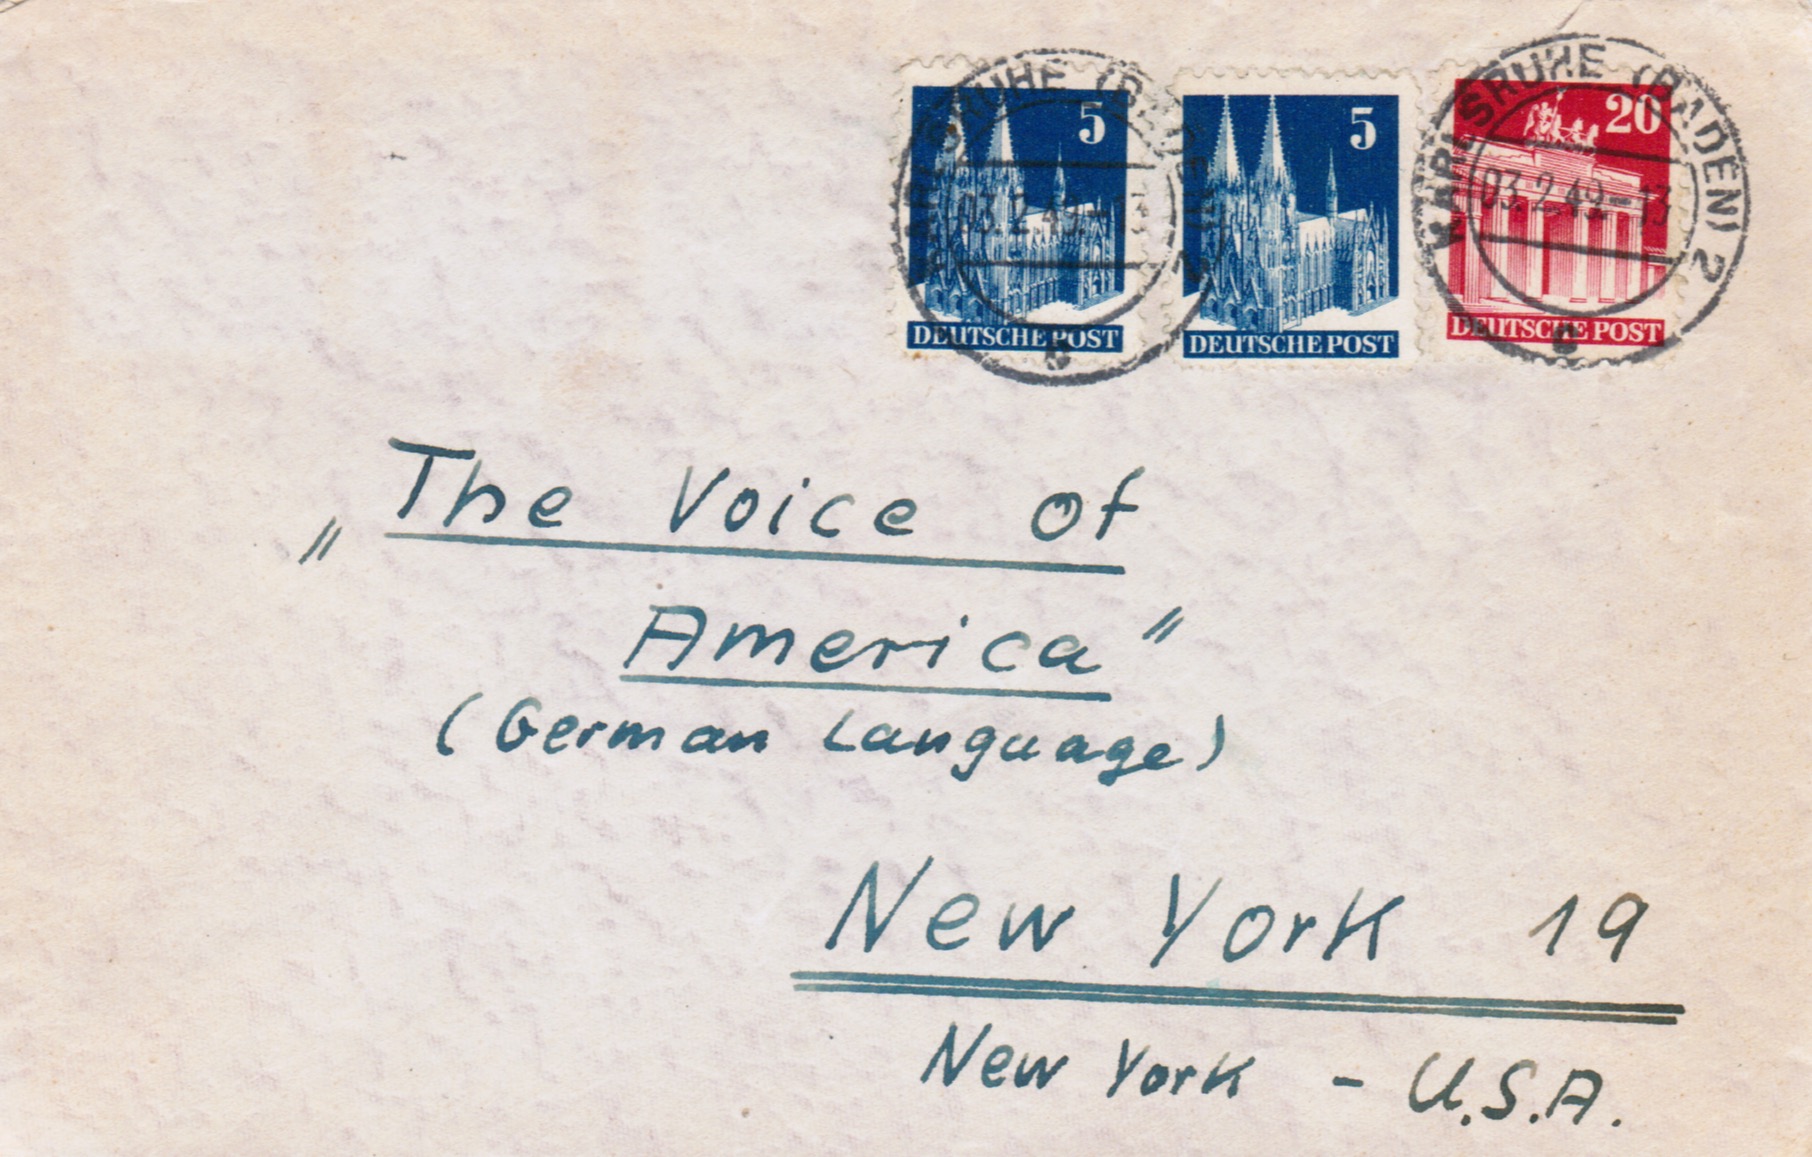 Envelope for a letter sent in 1949 to the Voice of America German Service in New York.